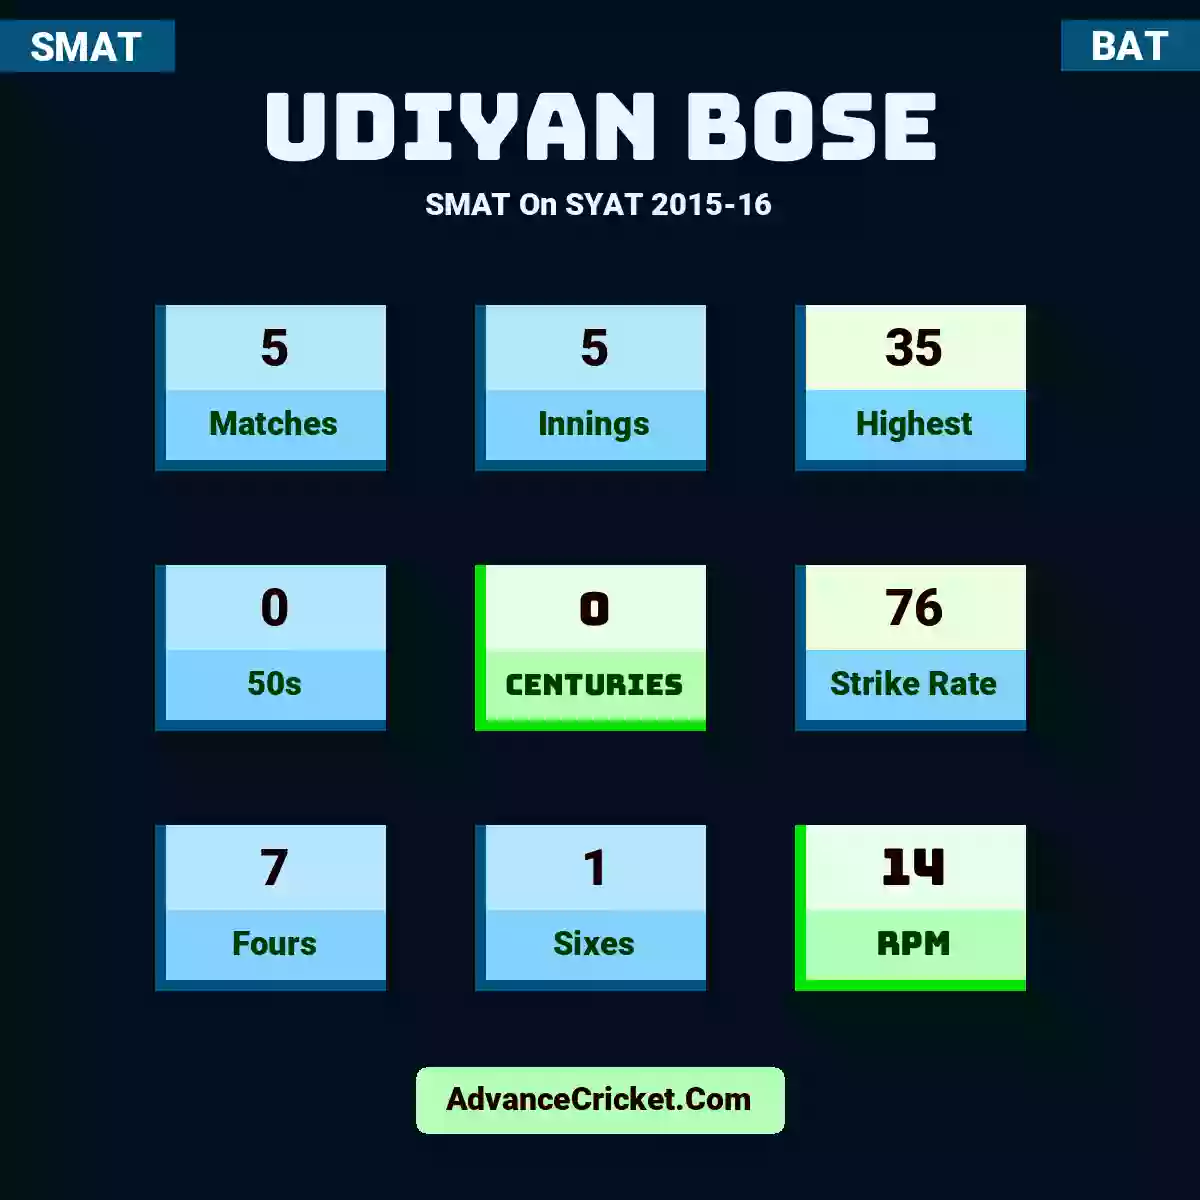 Udiyan Bose SMAT  On SYAT 2015-16, Udiyan Bose played 5 matches, scored 35 runs as highest, 0 half-centuries, and 0 centuries, with a strike rate of 76. U.Bose hit 7 fours and 1 sixes, with an RPM of 14.